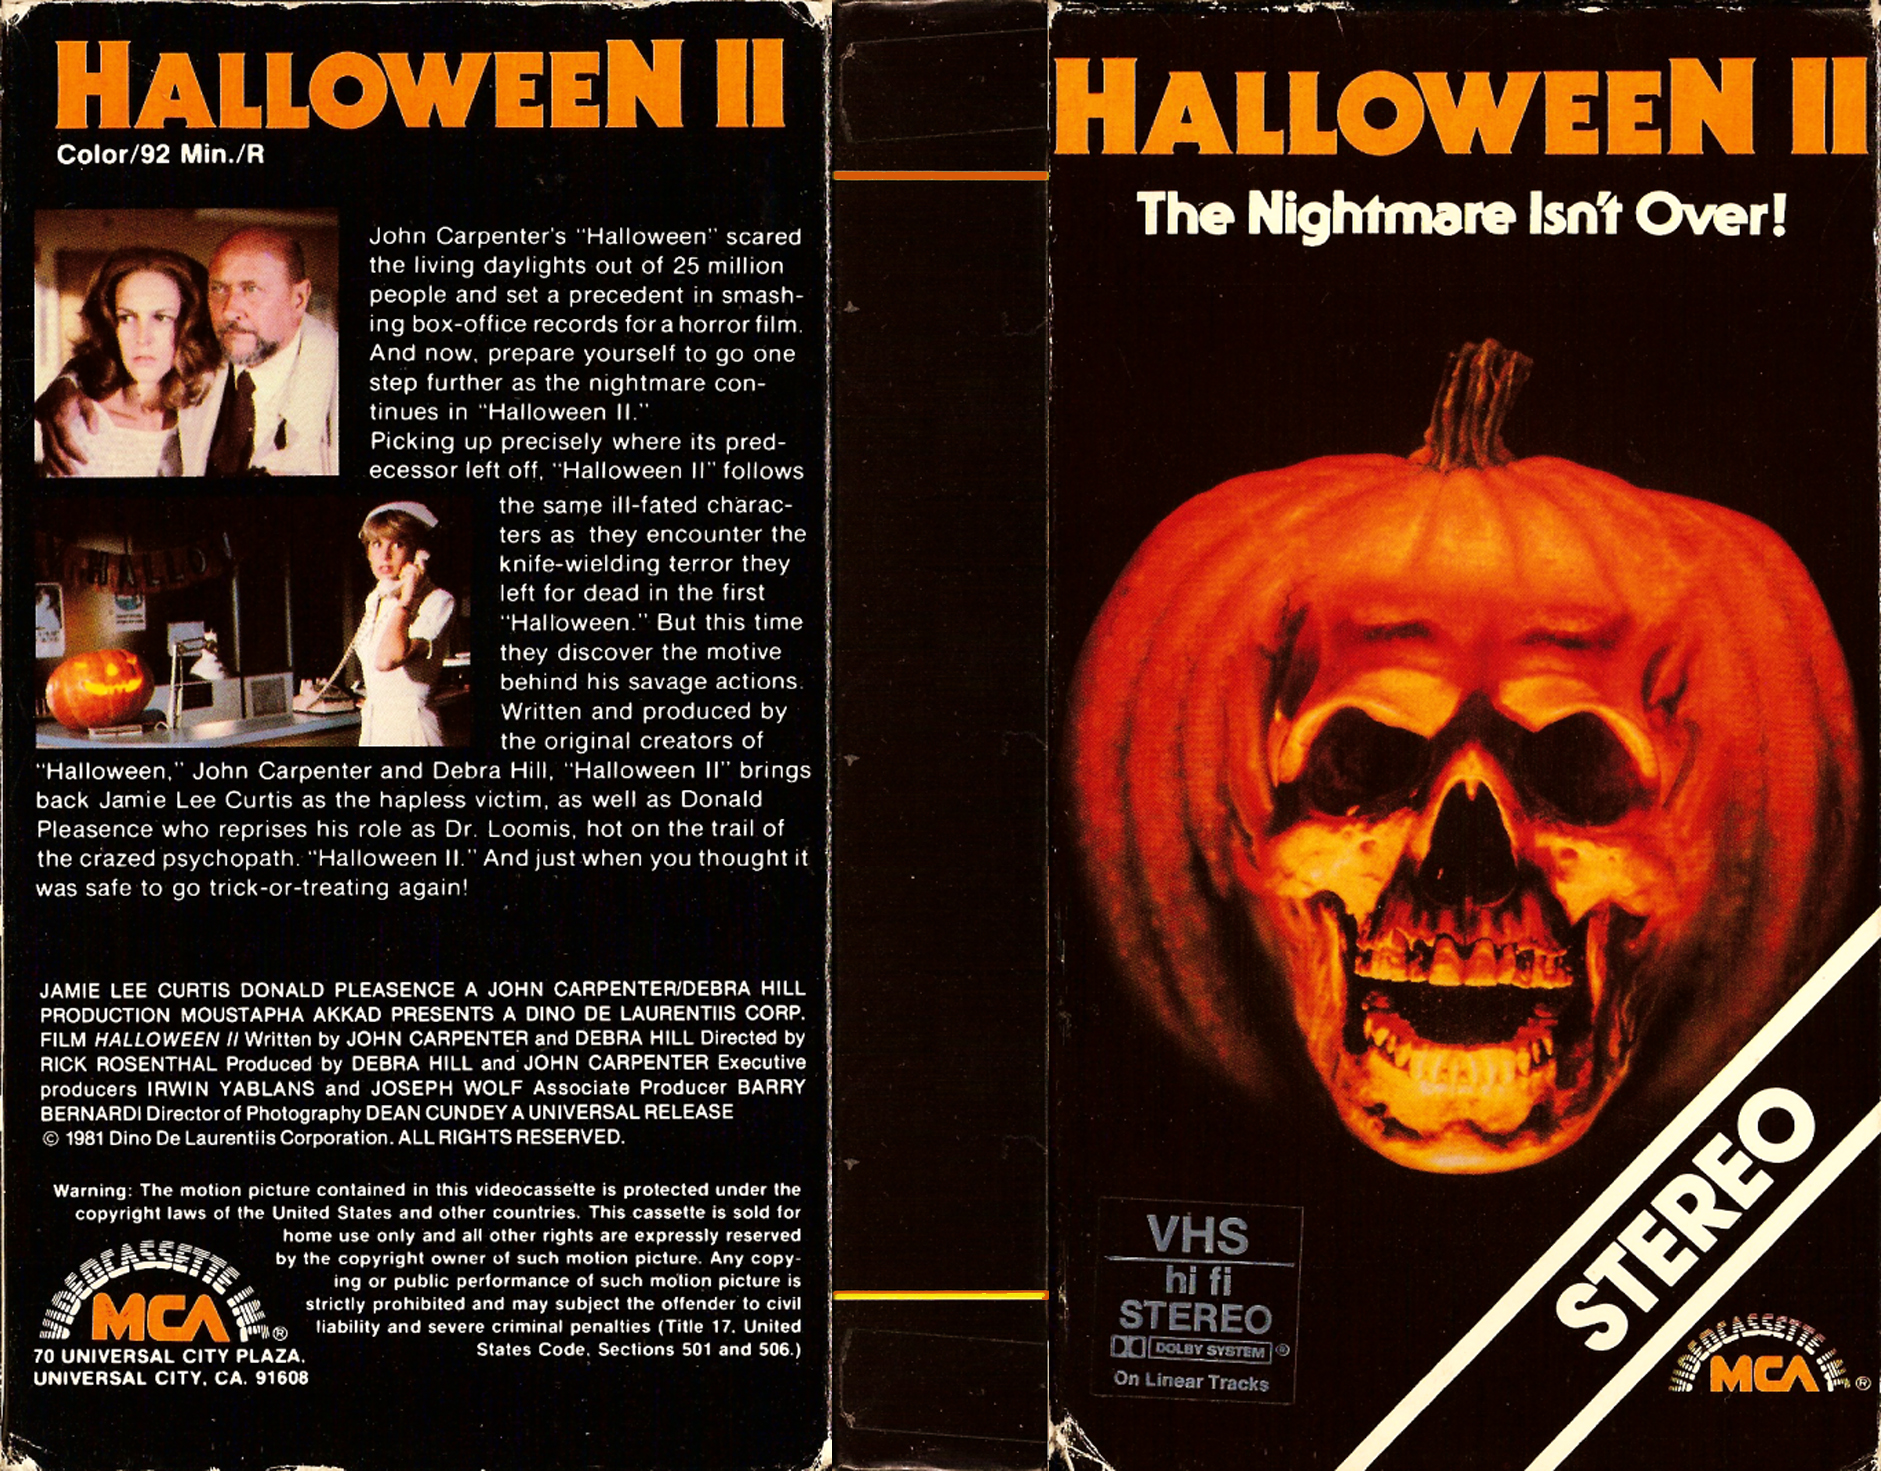 November 10 2011 VHS cover scan - click for high res version halloween 2.